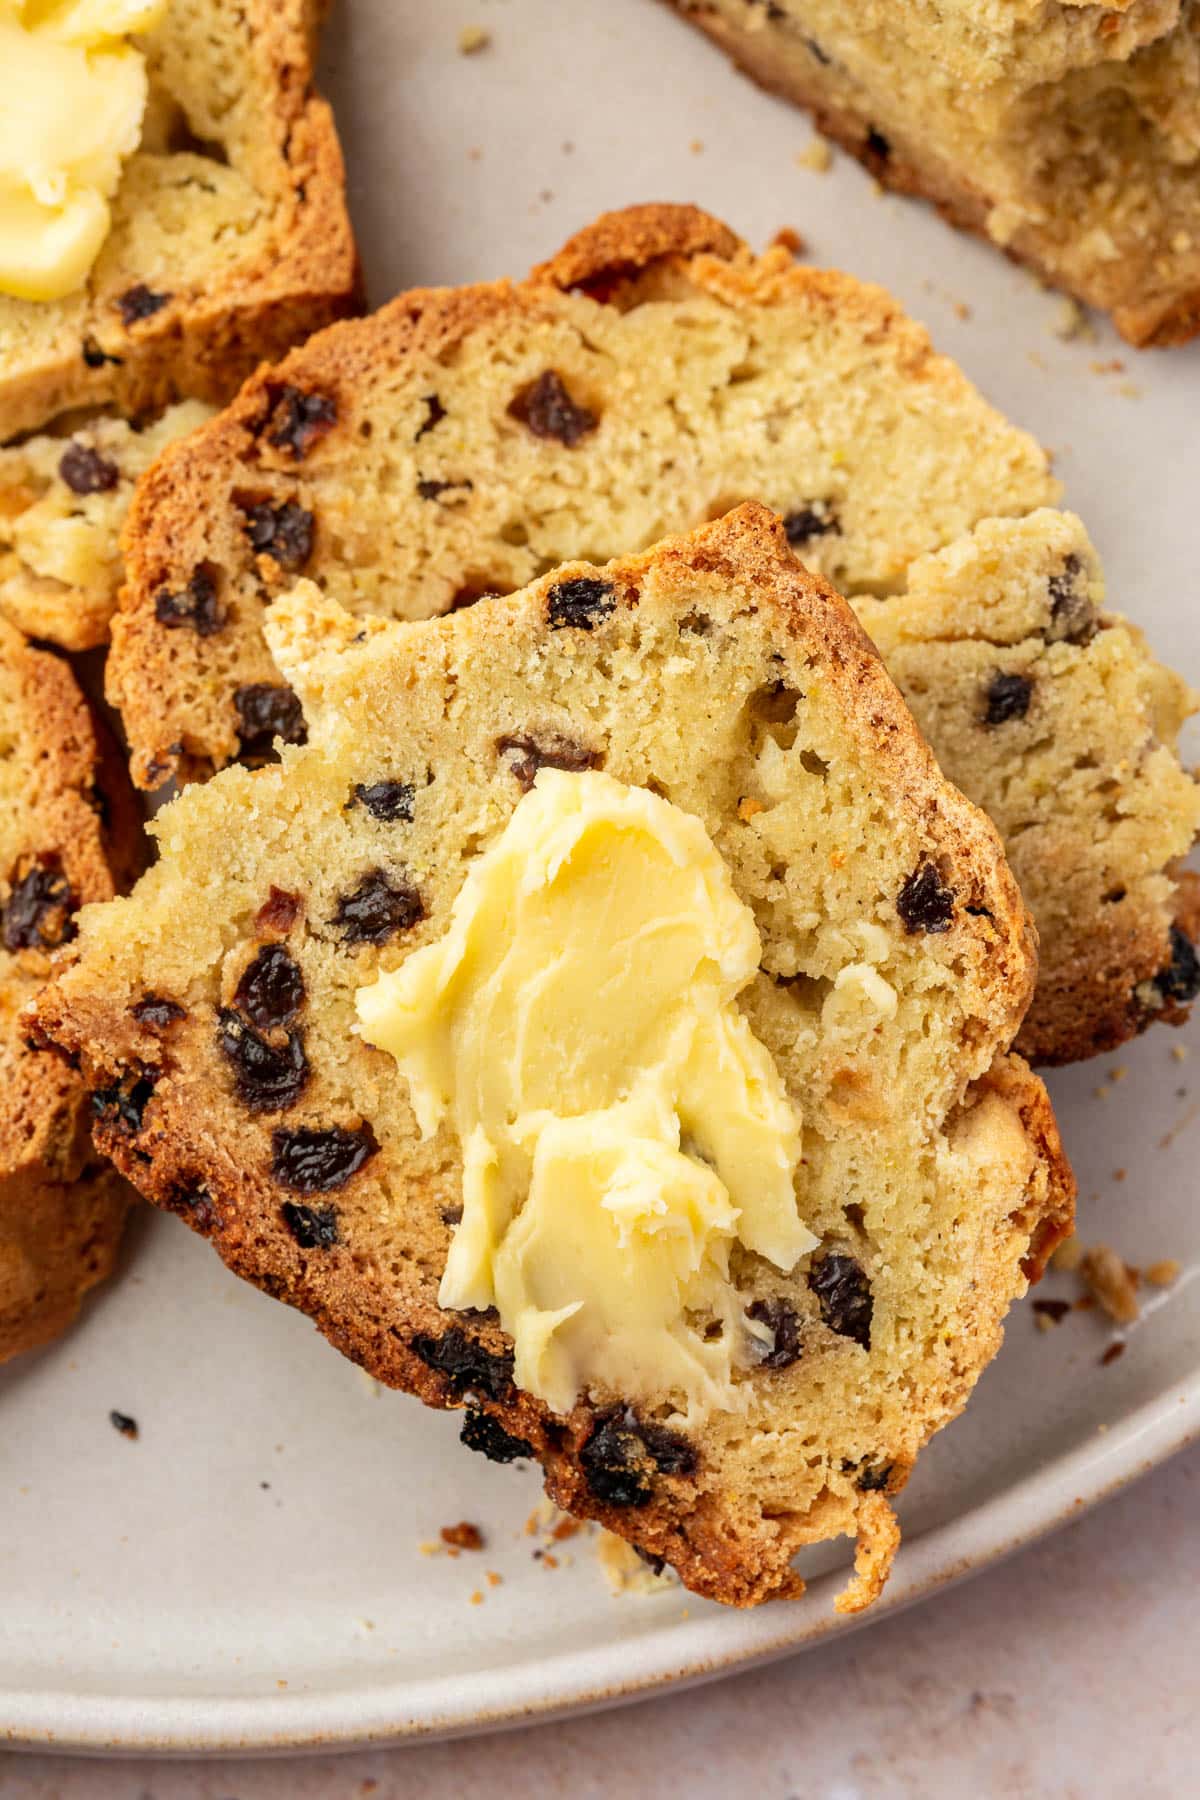 A photo of two slices of gluten-free Irish soda bread with currants topped with a slather of Irish butter with a loaf of Irish soda bread in the background.